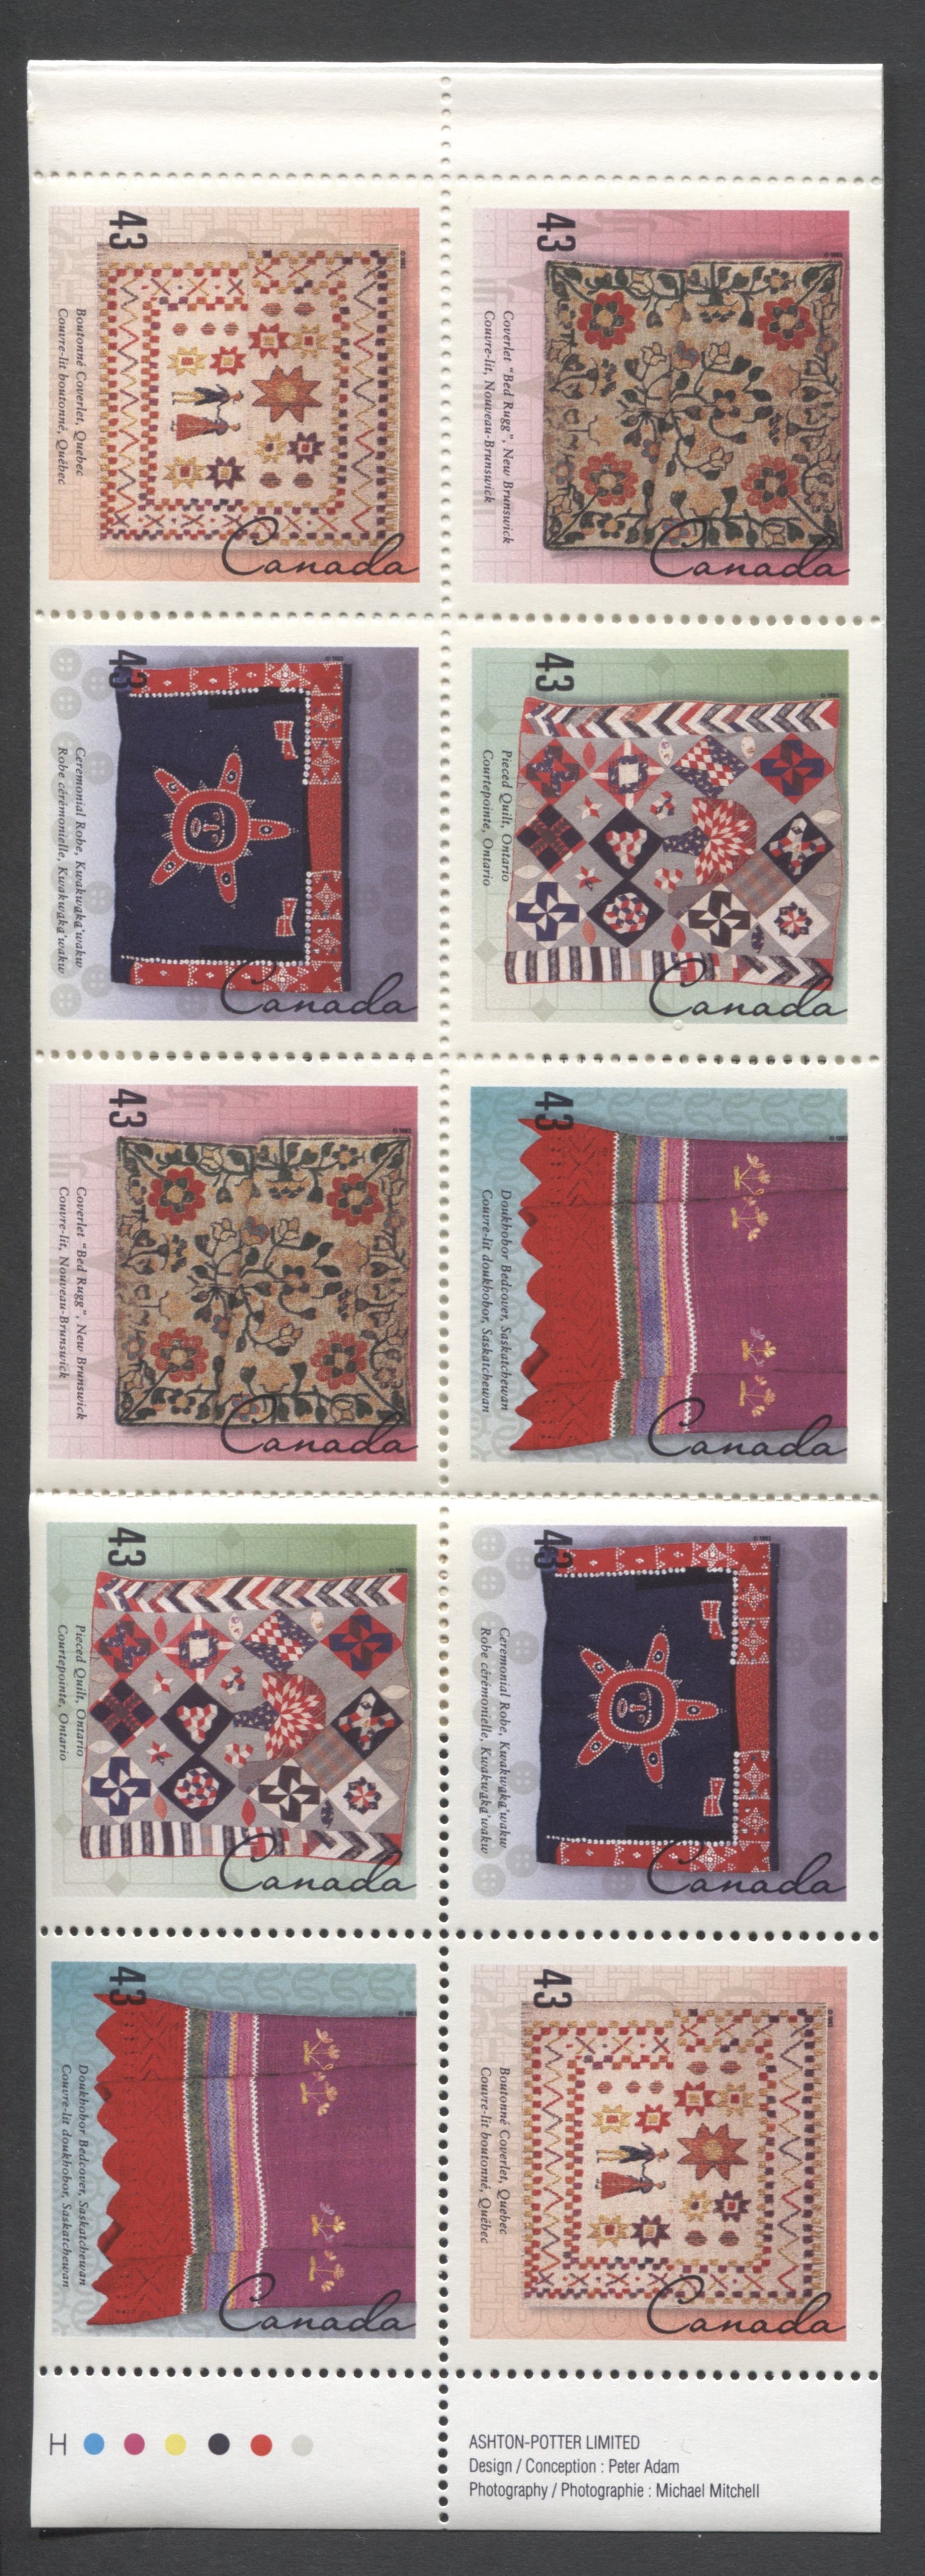 Canada #BK159a-b 1993 Hand Crafted Textiles Issue, Complete $4.30  Booklet, Harrison Paper, Dead Paper, 4 mm GT-4 Tagging